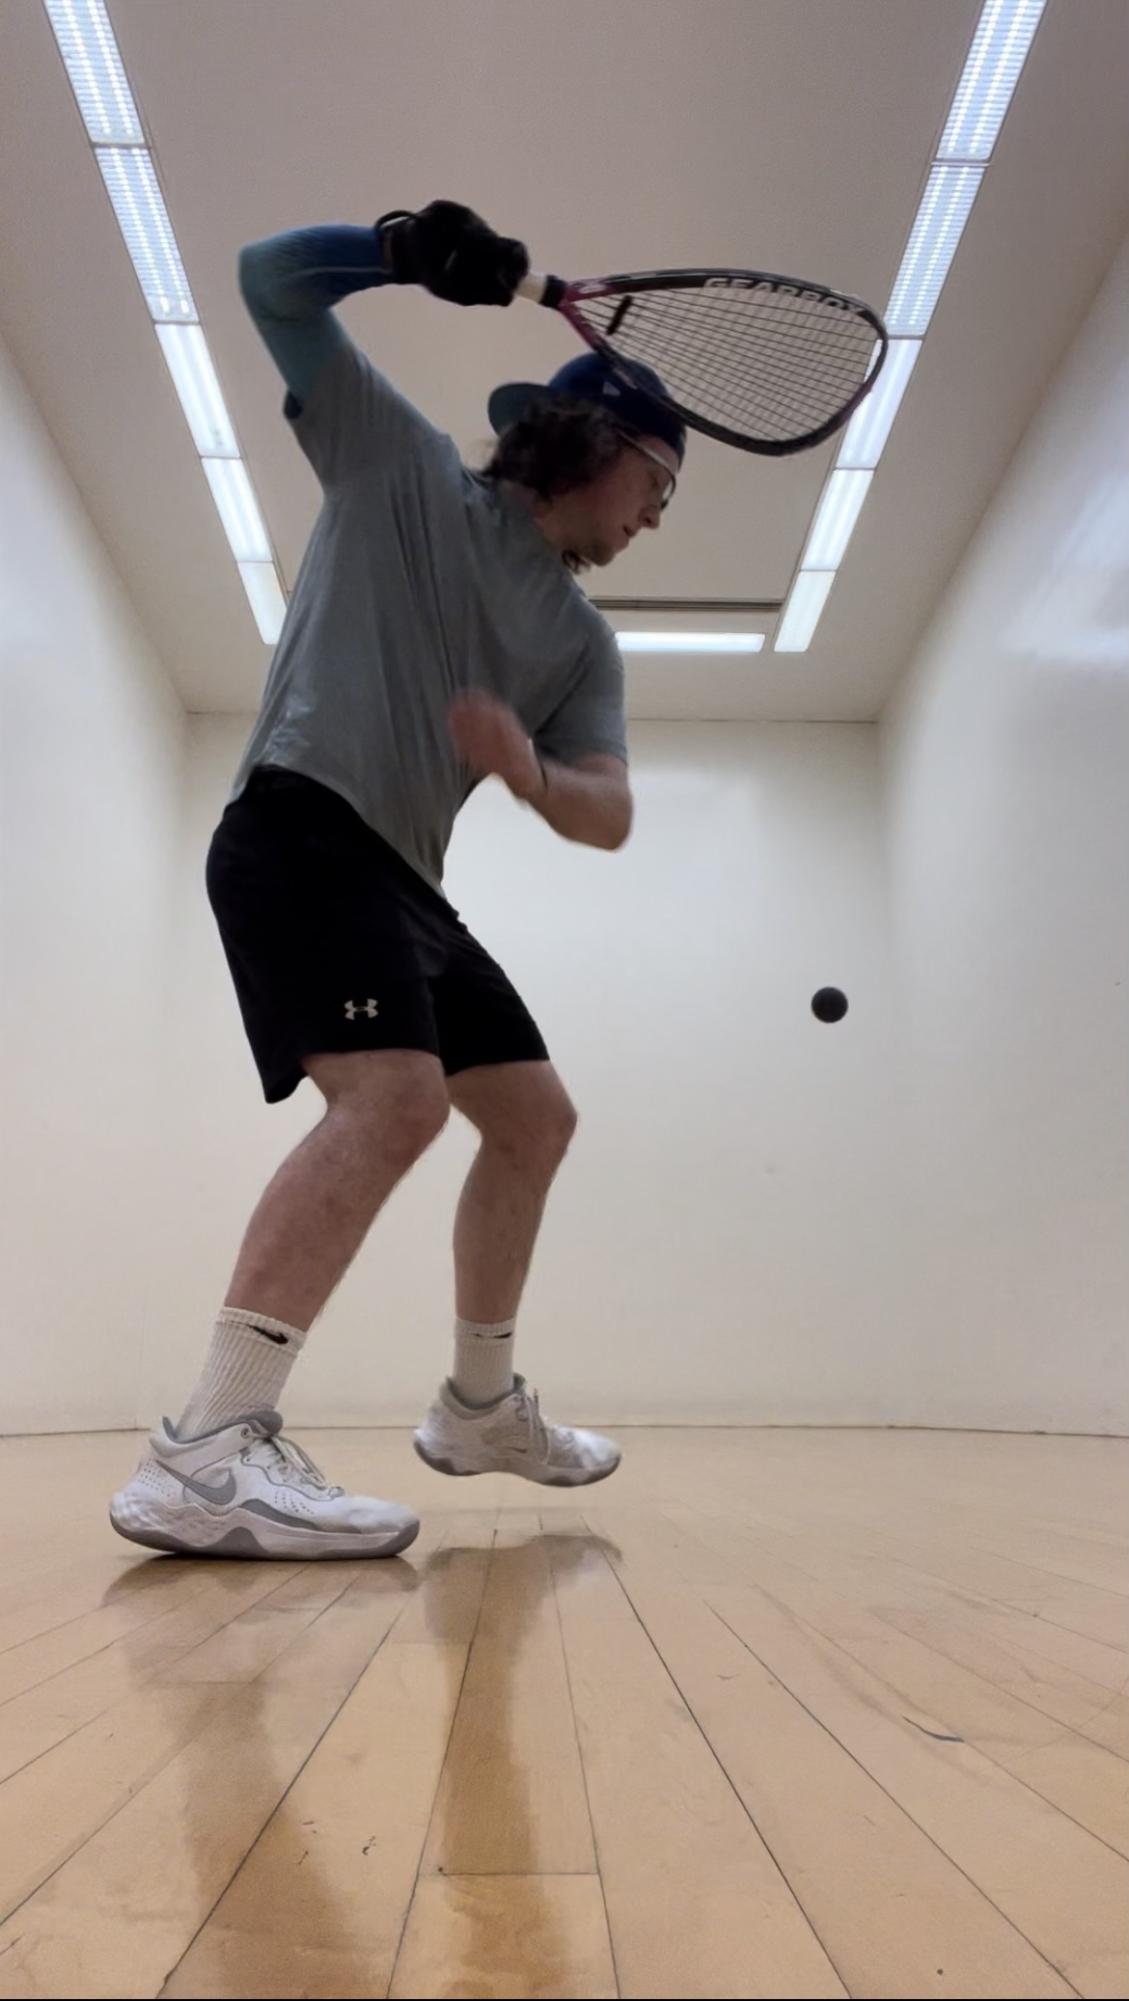 Steadman-Shockley practices racquetball.